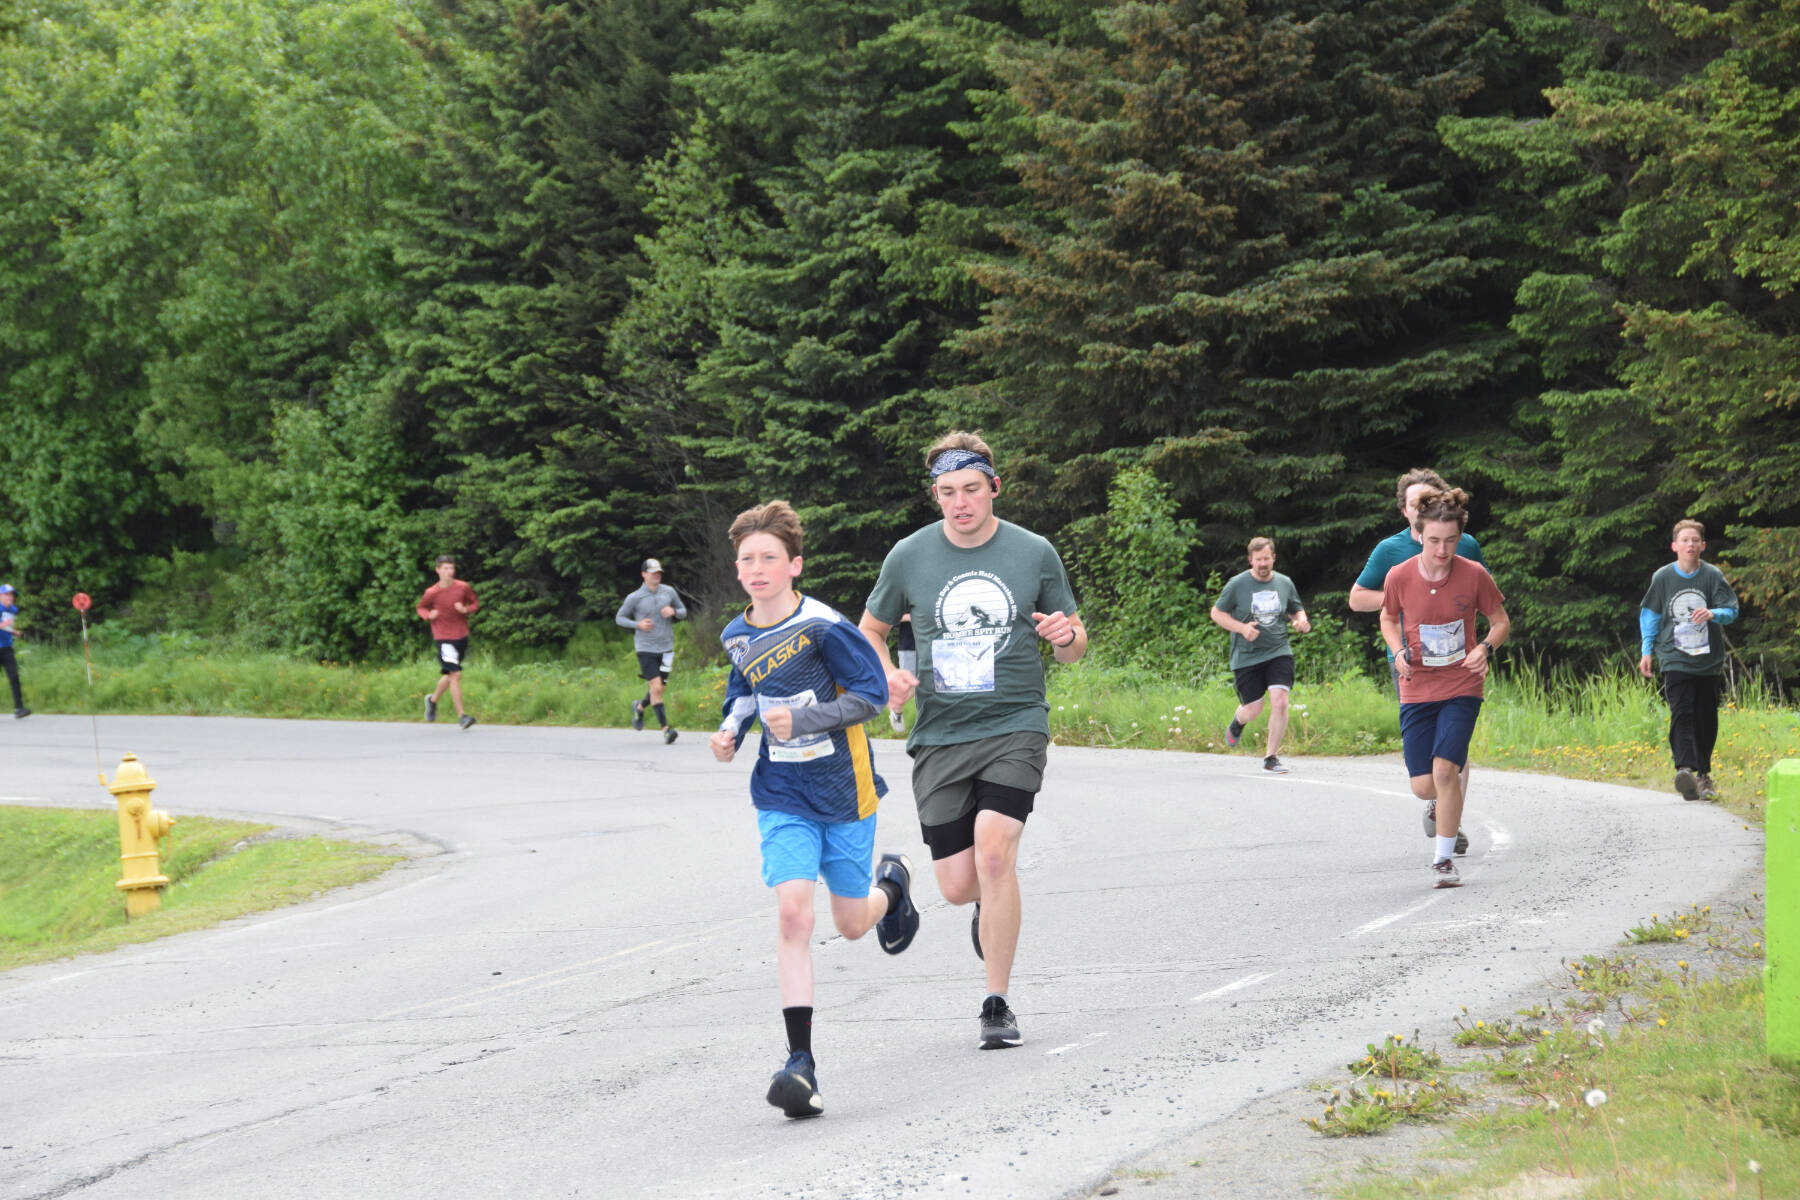 Runners participating in the Homer Spit Run 10K to the Bay race round the curve of Ben Walters Lane on Saturday, June 24, 2023 in Homer, Alaska. (Delcenia Cosman/Homer News)